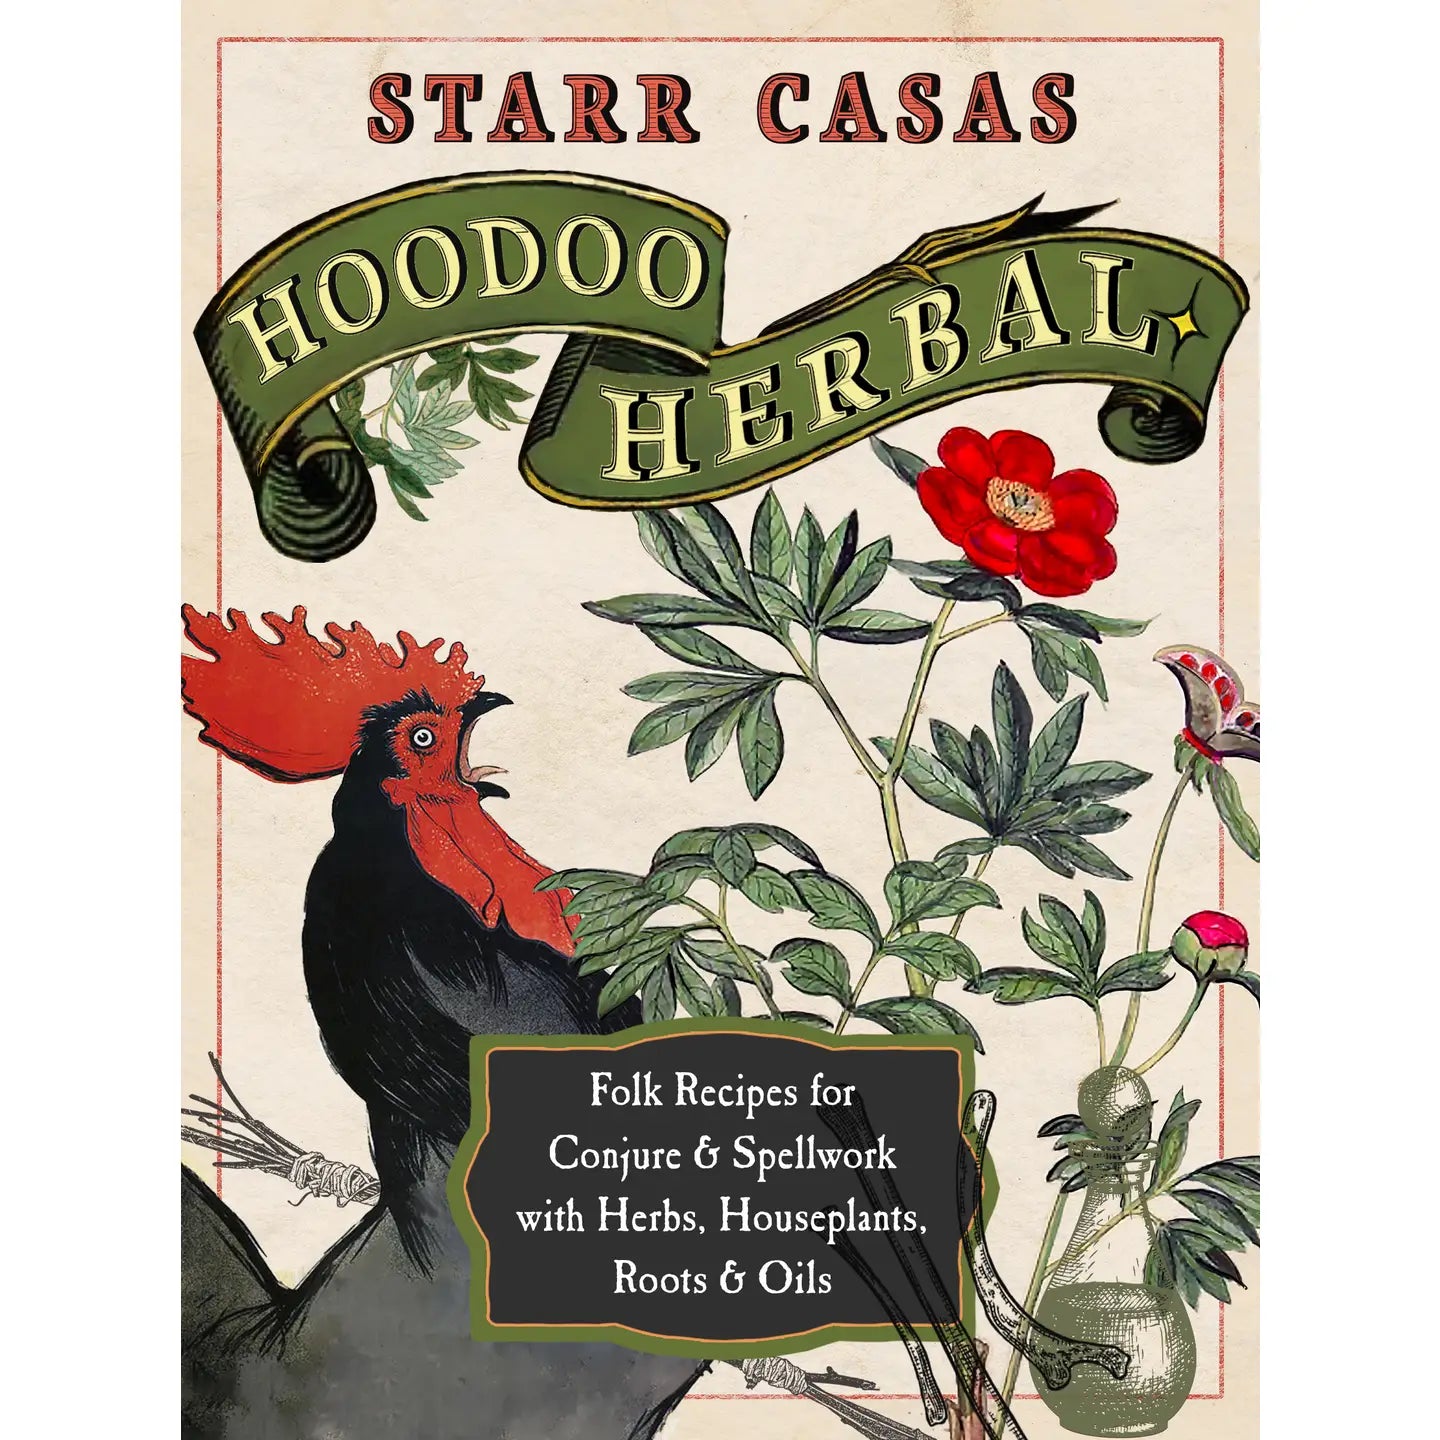 hoodoo herbal: folk recipes for conjure and spellwork